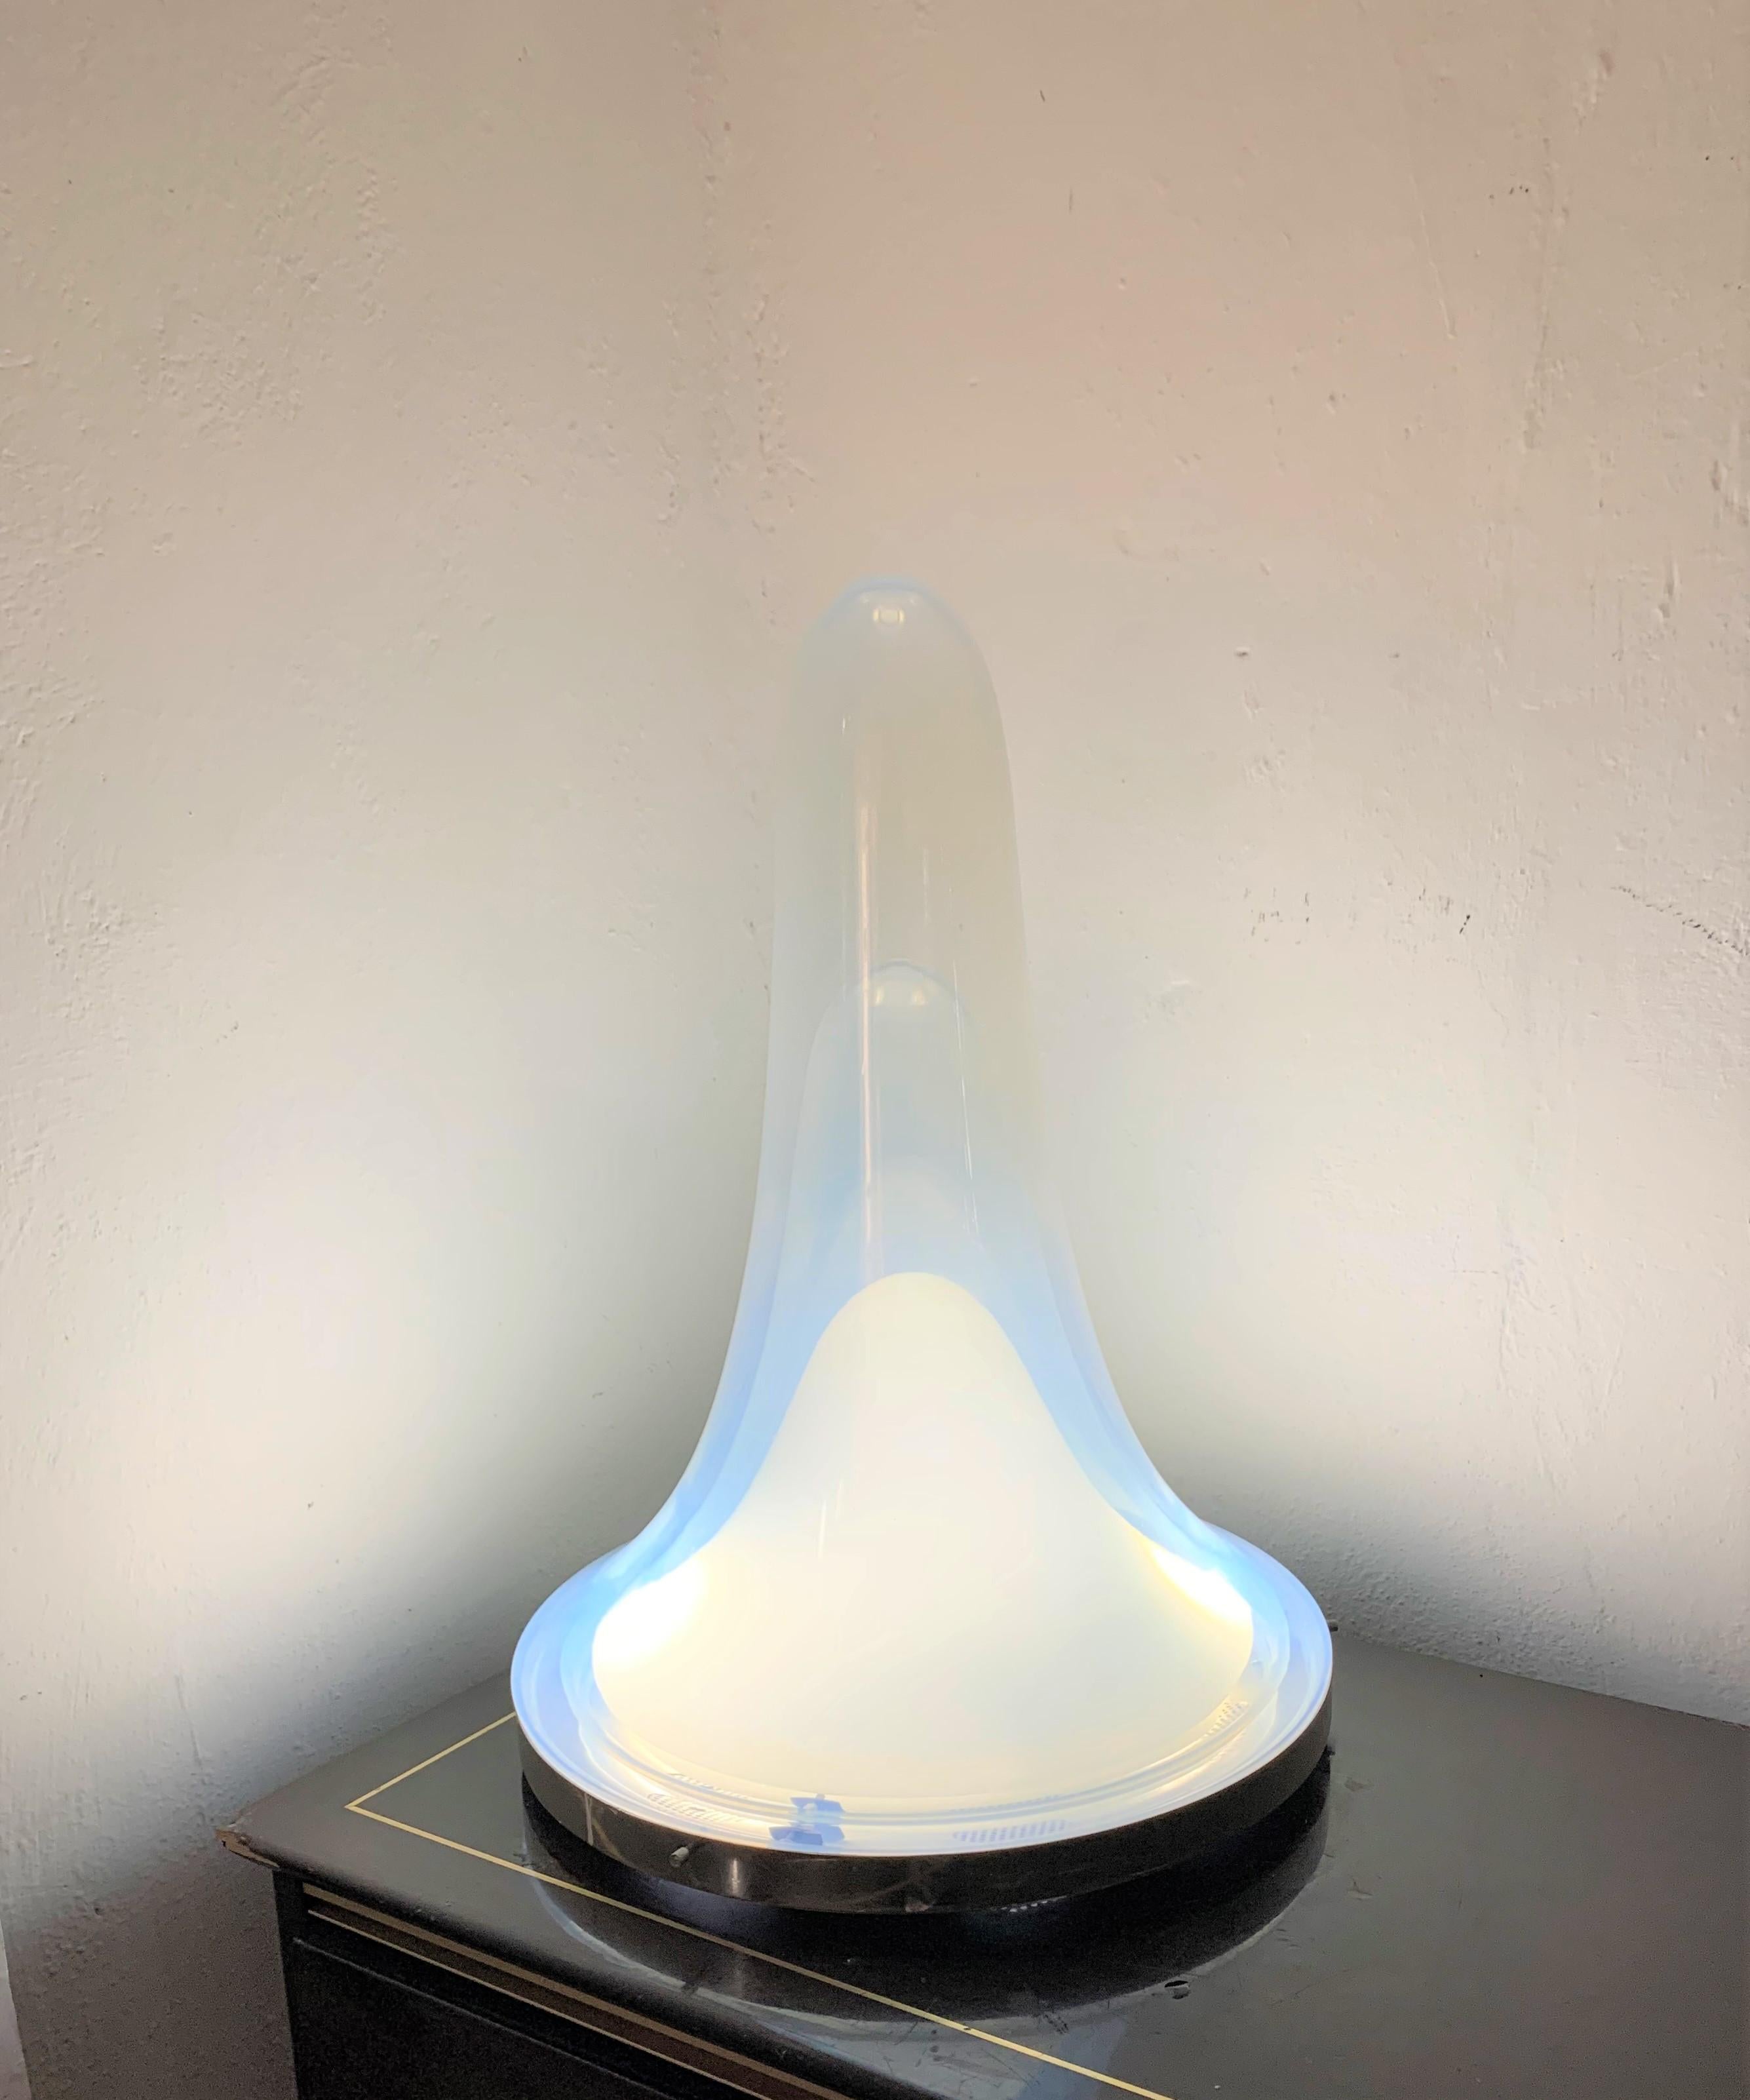 Beautiful Mid-Century Modern lamp by Mazzega, designed by Carlo Nason, circa 1960, in opalescent and opaline hand blown Murano glass.
This lamp consist of three separate pieces of glass and can be used as a table or ceiling lamp as preferred.
This